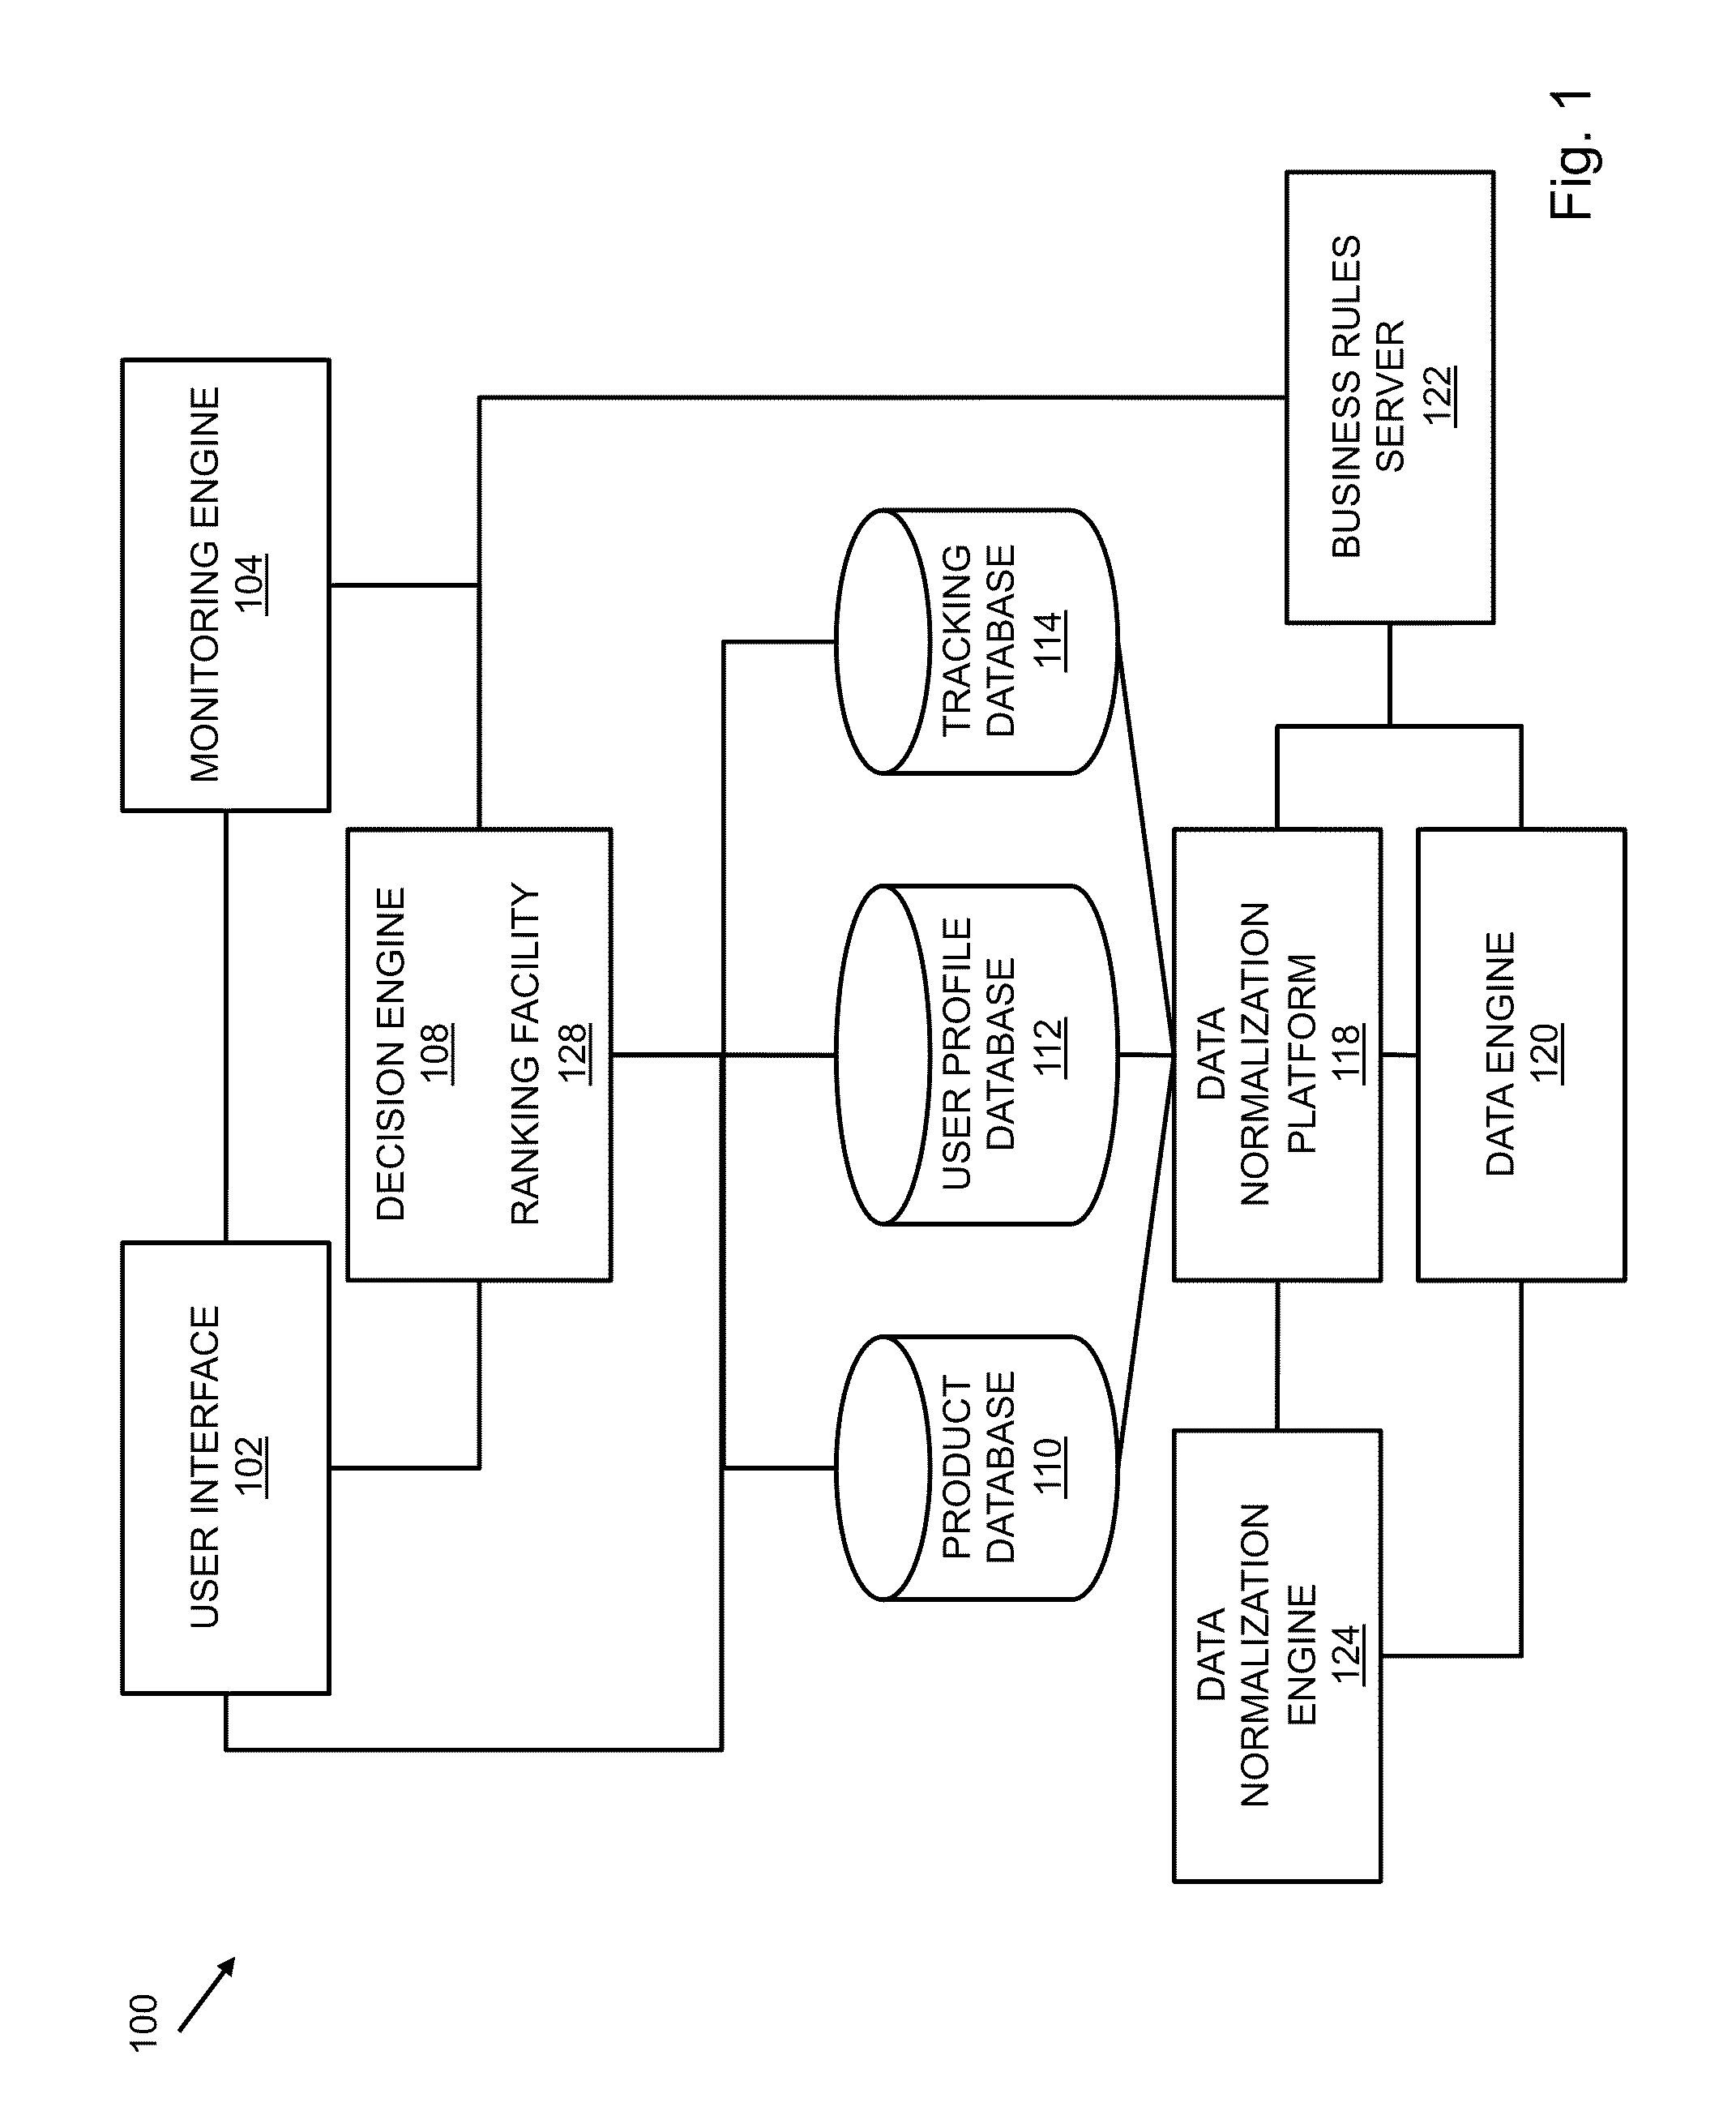 System and method for providing a savings opportunity matched to a spend pattern in association with a financial account